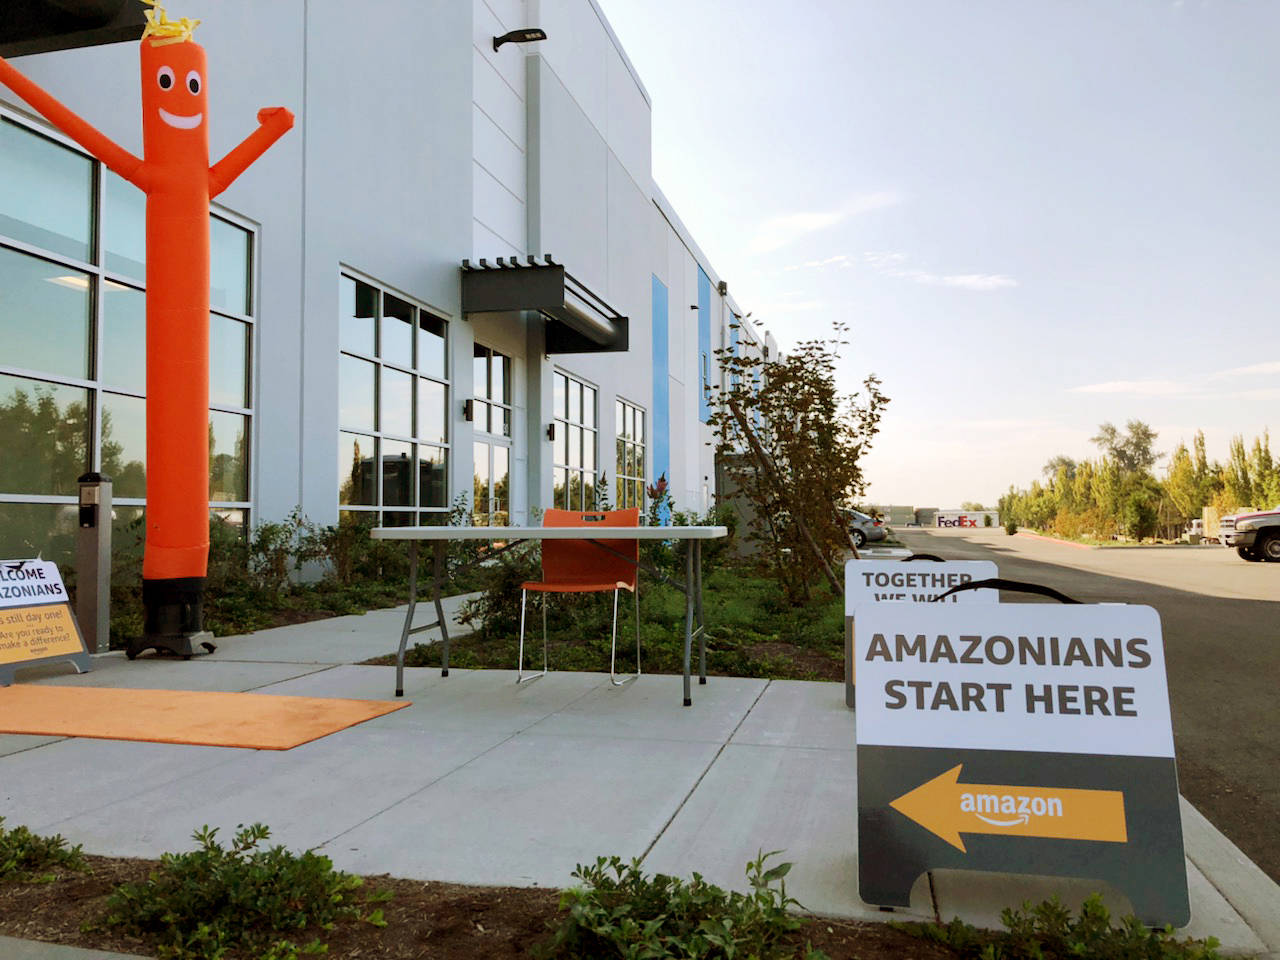 The 100,000-square-foot Amazon fulfillment/delivery center at the Port of Everett’s Riverside Business Park is expected to hire hundreds of workers. (Janice Podsada / The Herald)